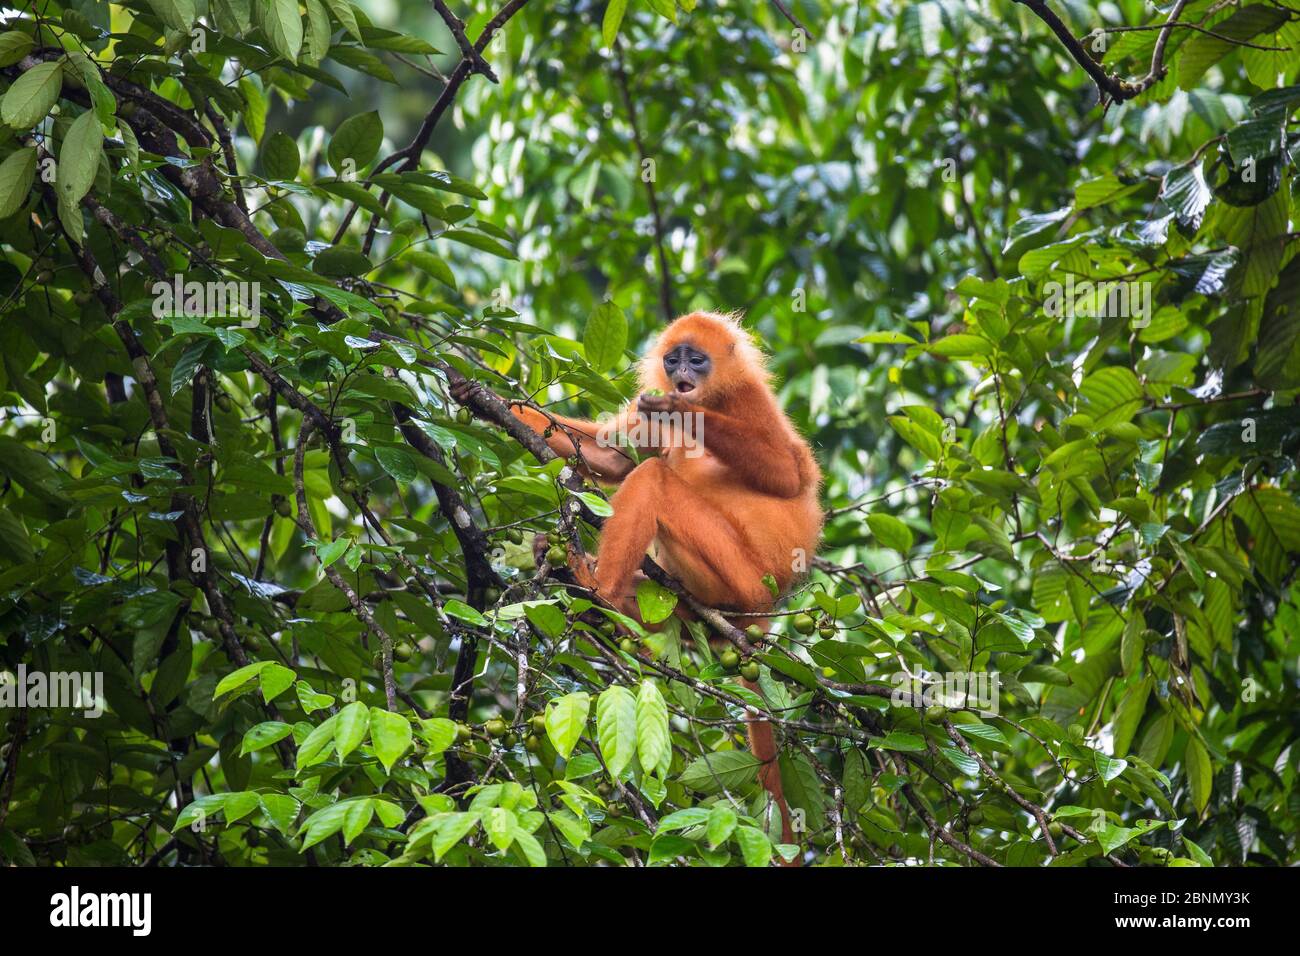 Maroon / Red leaf monkey / Langur (Presbytis rubicunda) eating fruits in tree, Danum Valley Conservation Area, Sabah, Borneo, Malaysia. Stock Photo